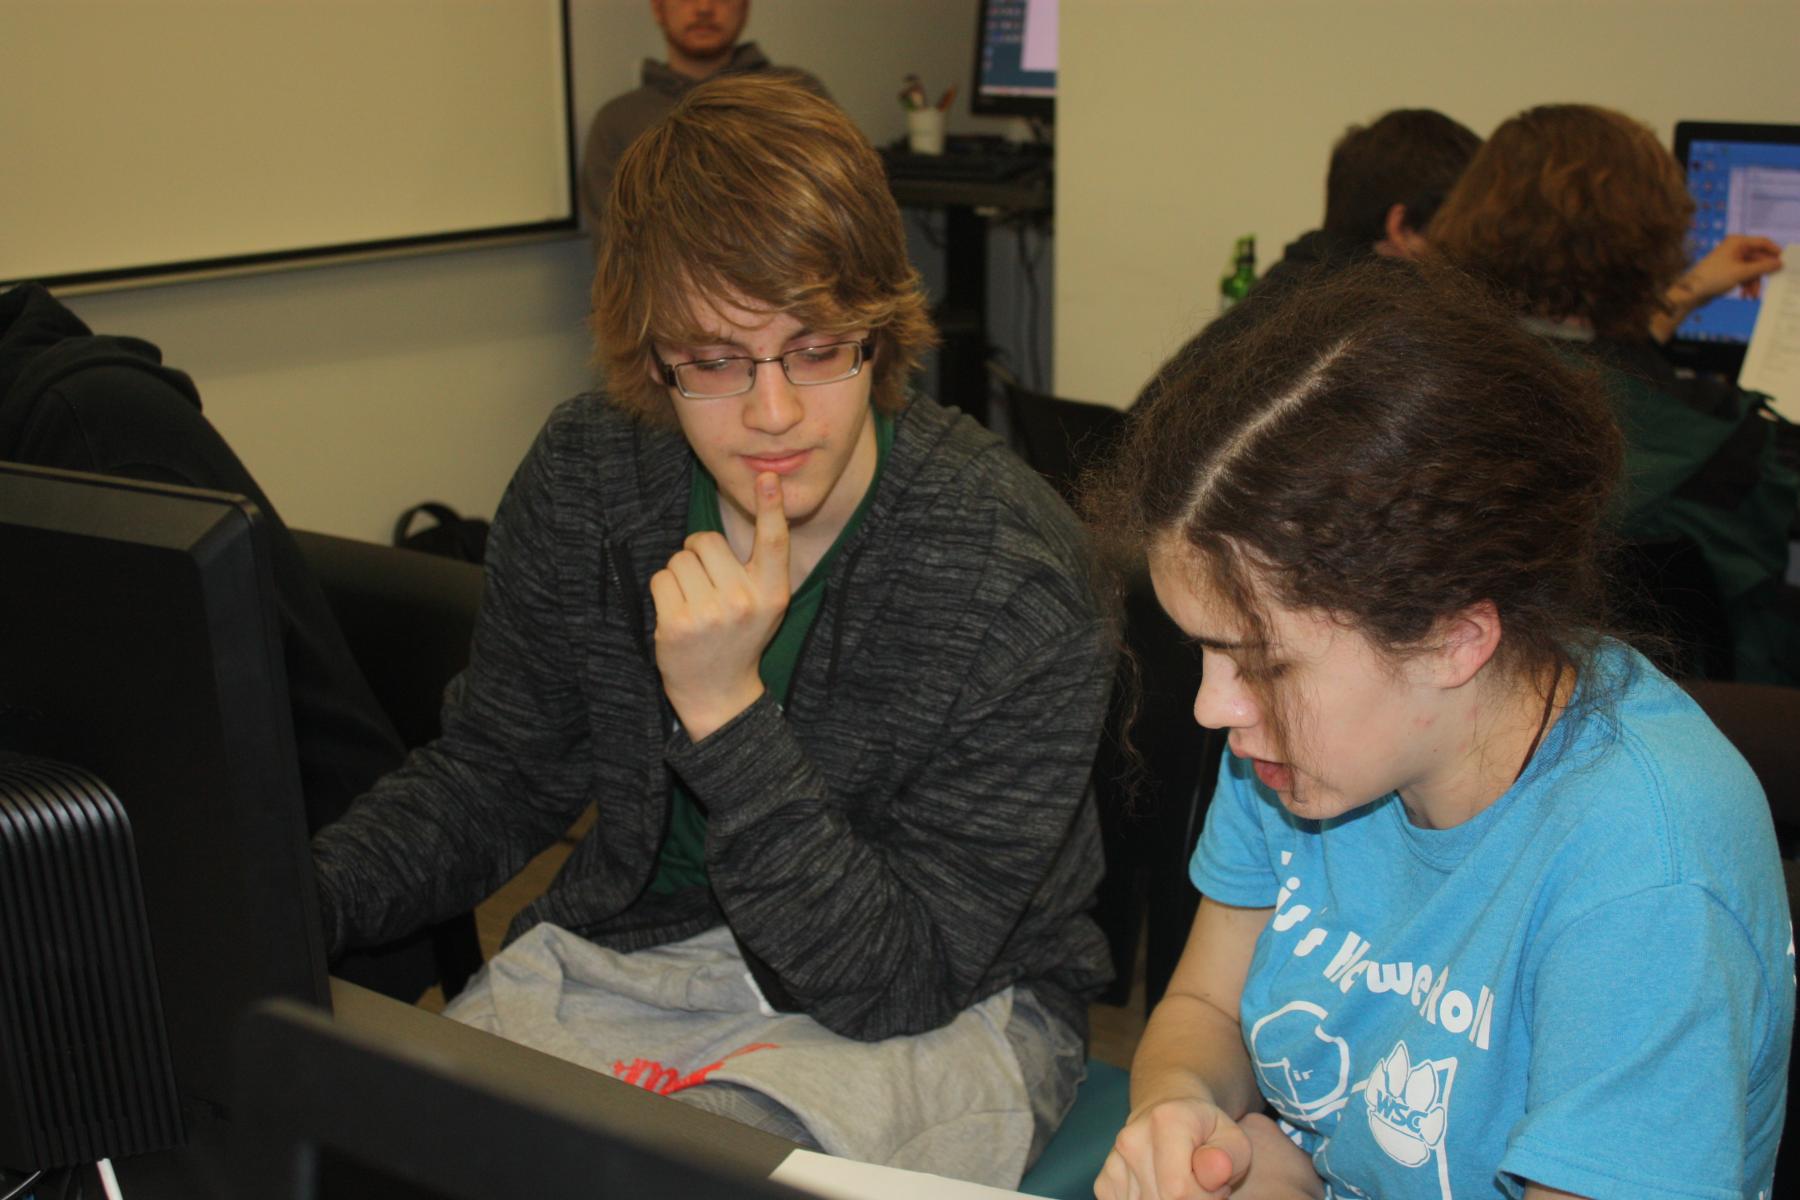 Students at a School of Computing camp.